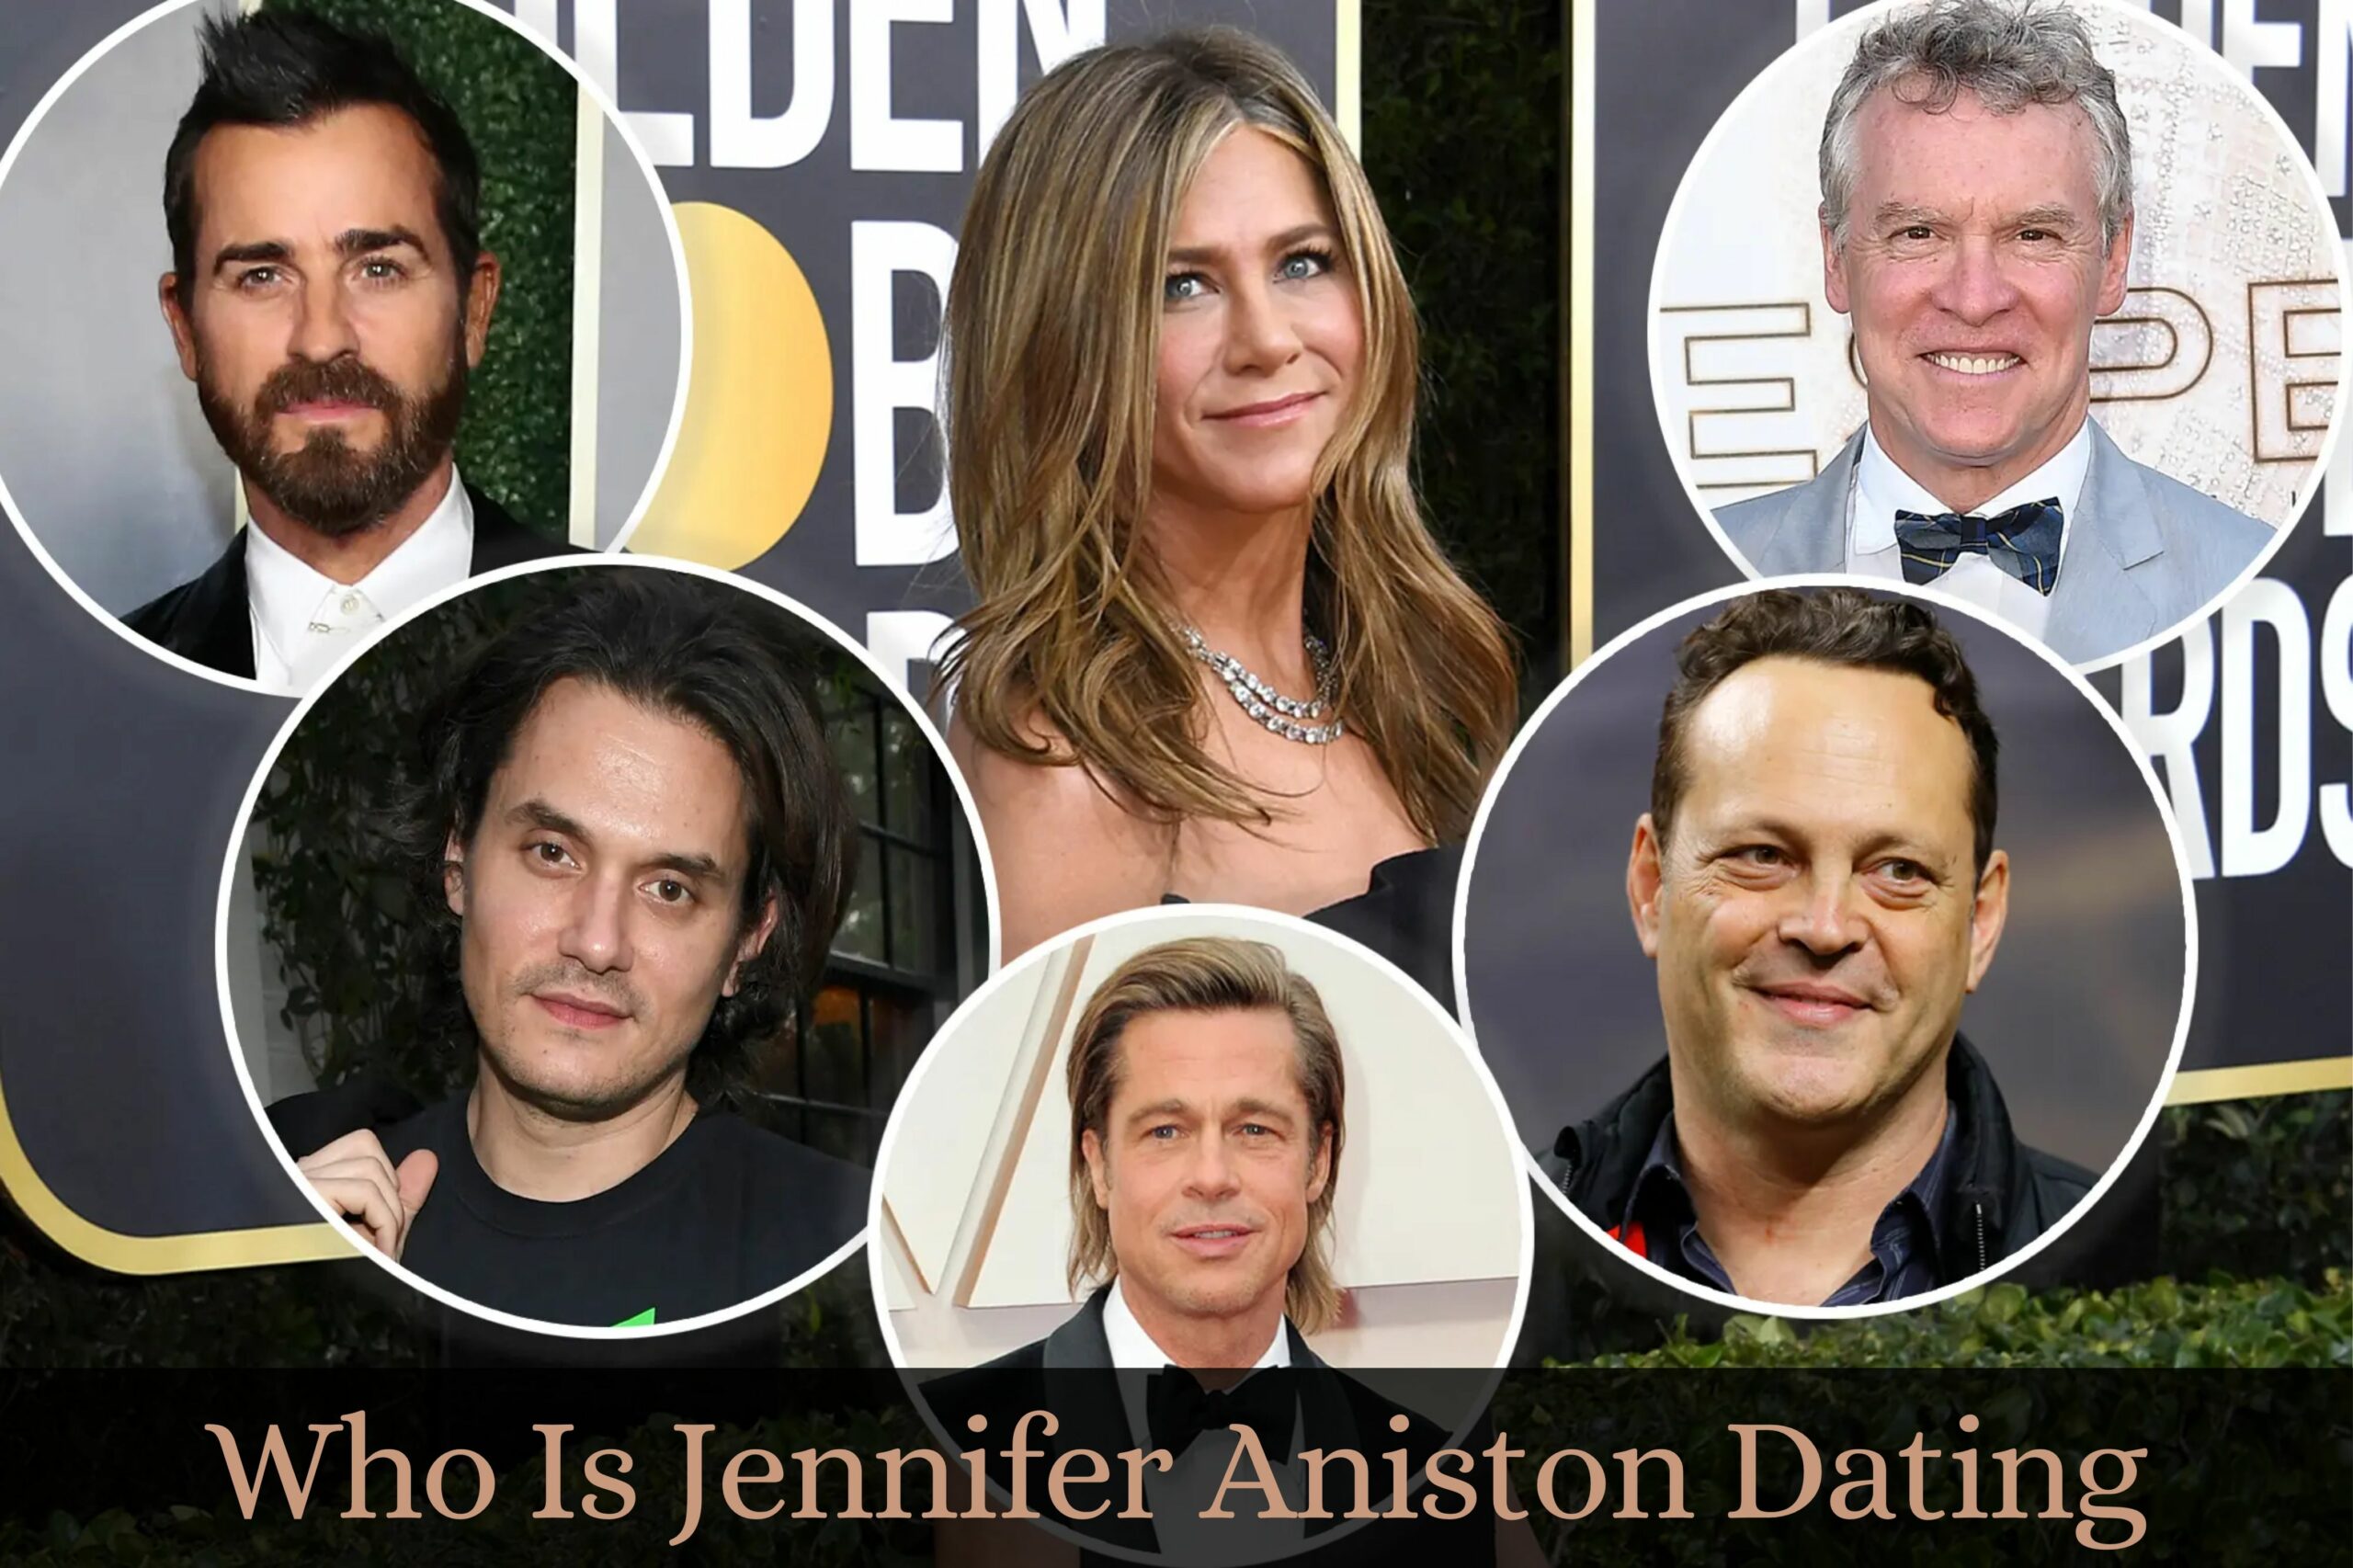 Who Is Jennifer Aniston Dating Now In 2022, How Many Relationships Jennifer Aniston Has Had In The Past?